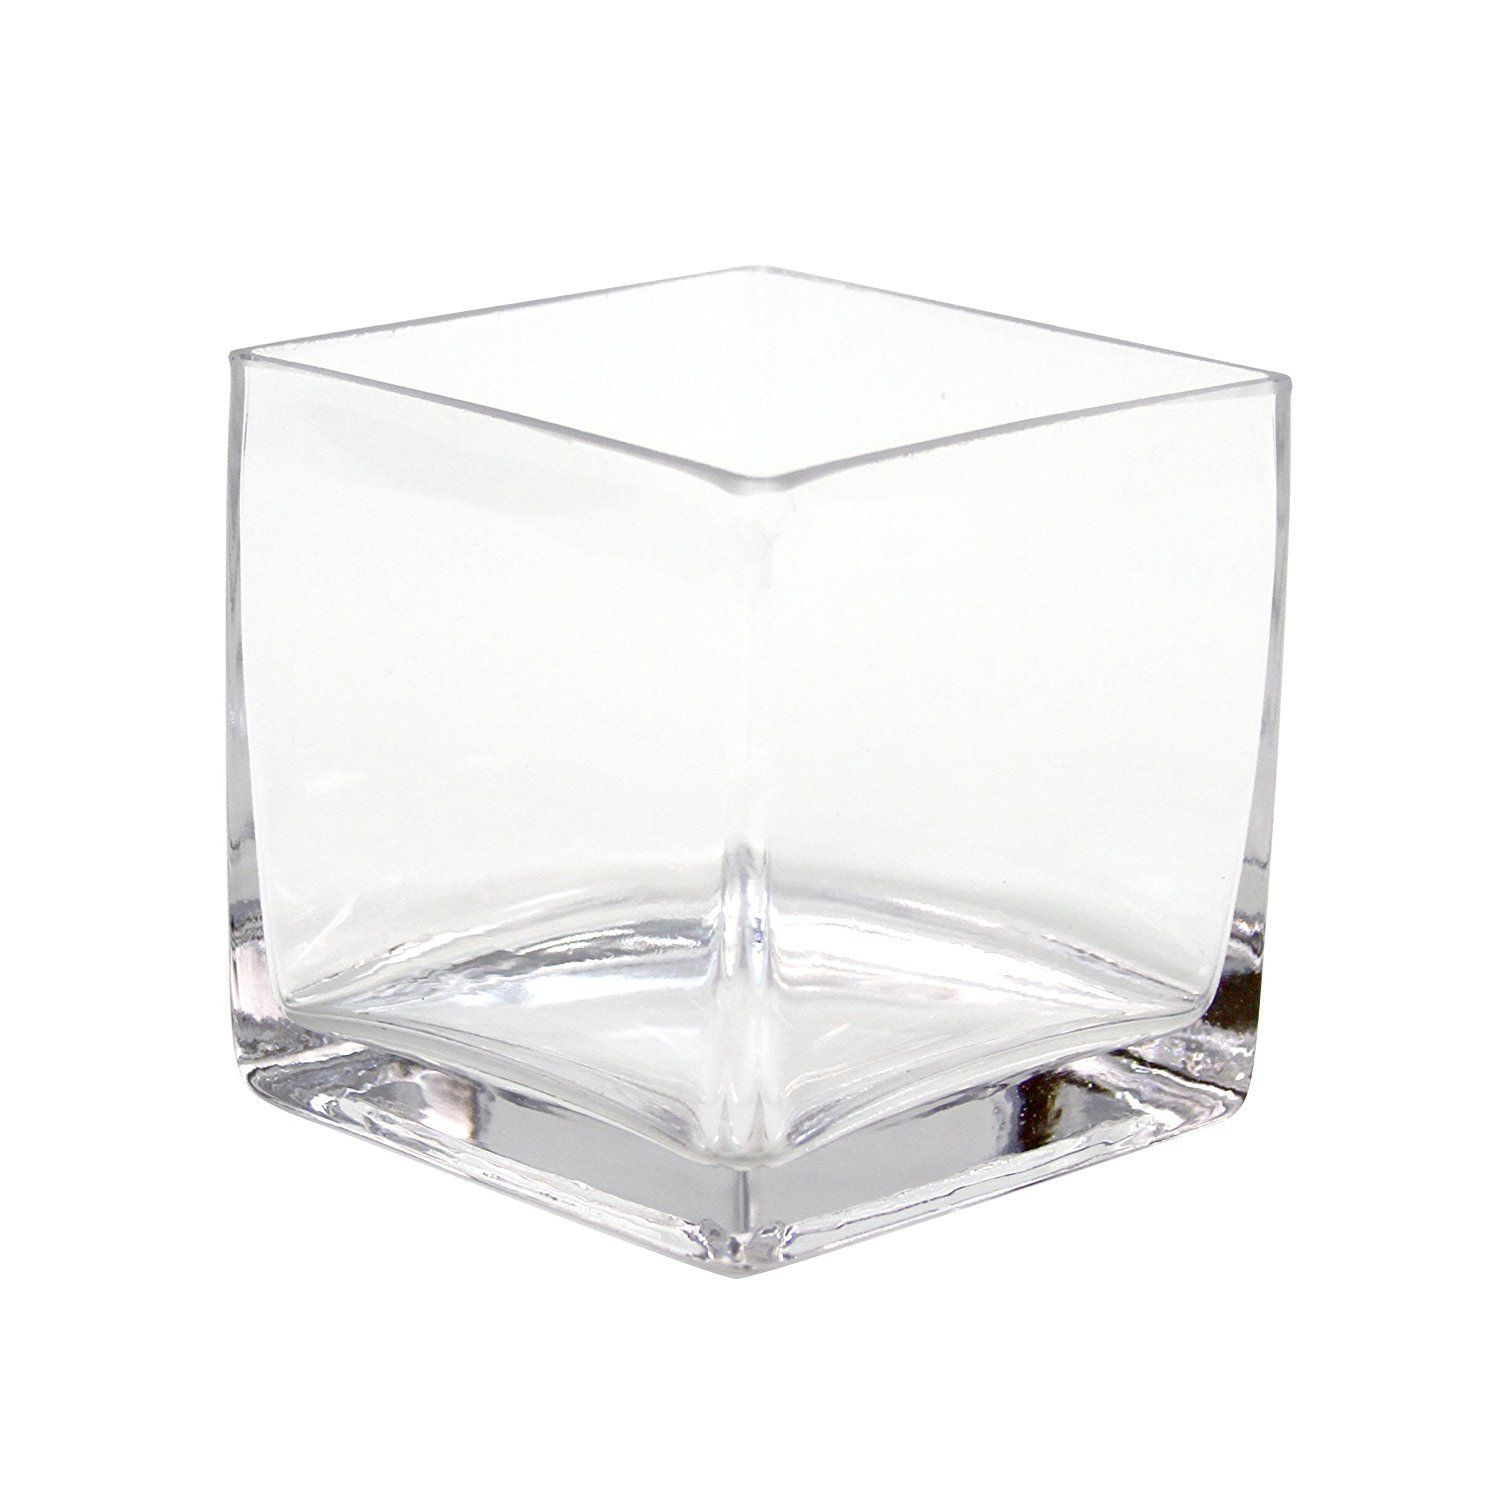 30 Ideal Square Glass Vases 2024 free download square glass vases of koyal wholesale 404343 12 pack cube square glass vases 4 by 4 by 4 within glass